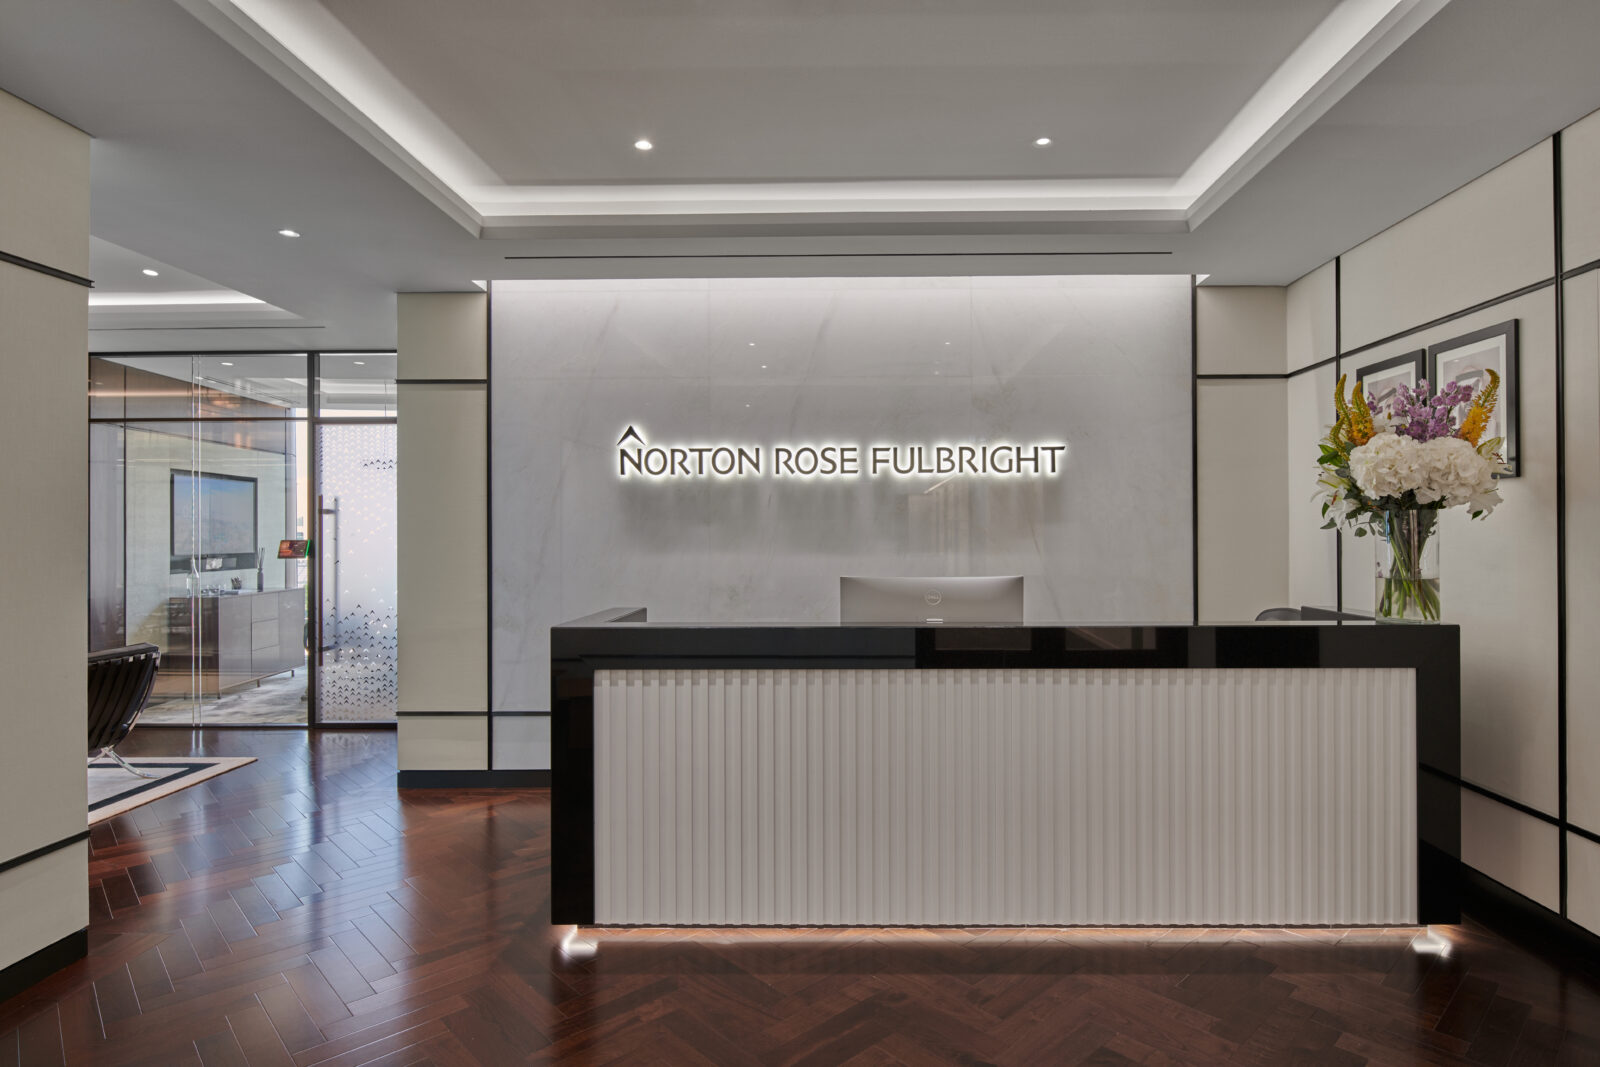 Architectural Commercial Lighting Scheme Norton Rose Fulbright Integrated Cove Light Welcoming Reception Offices Dubai Consultants Studio N